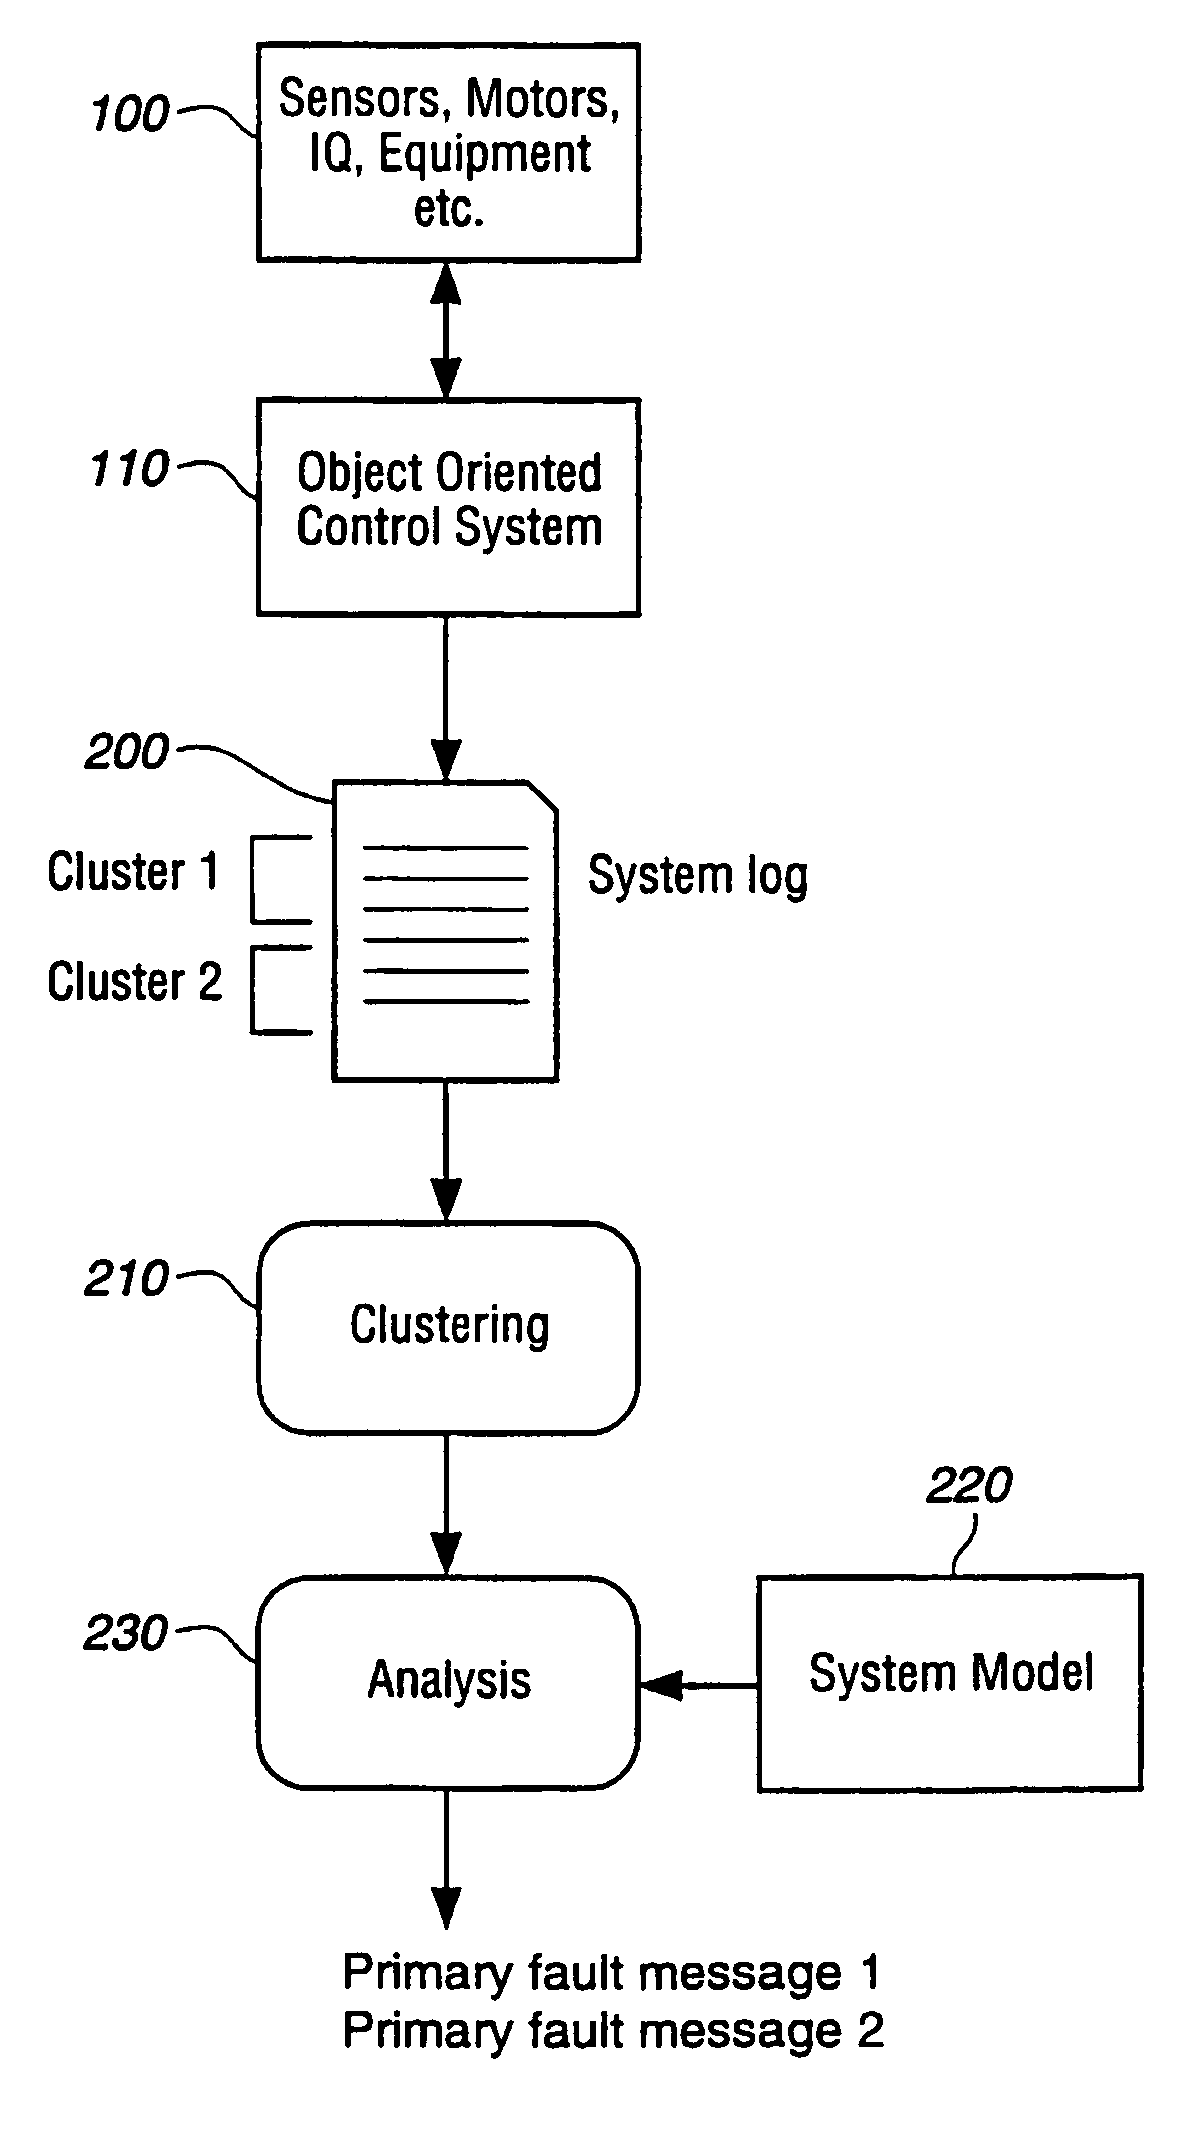 Method for isolating a fault from error messages